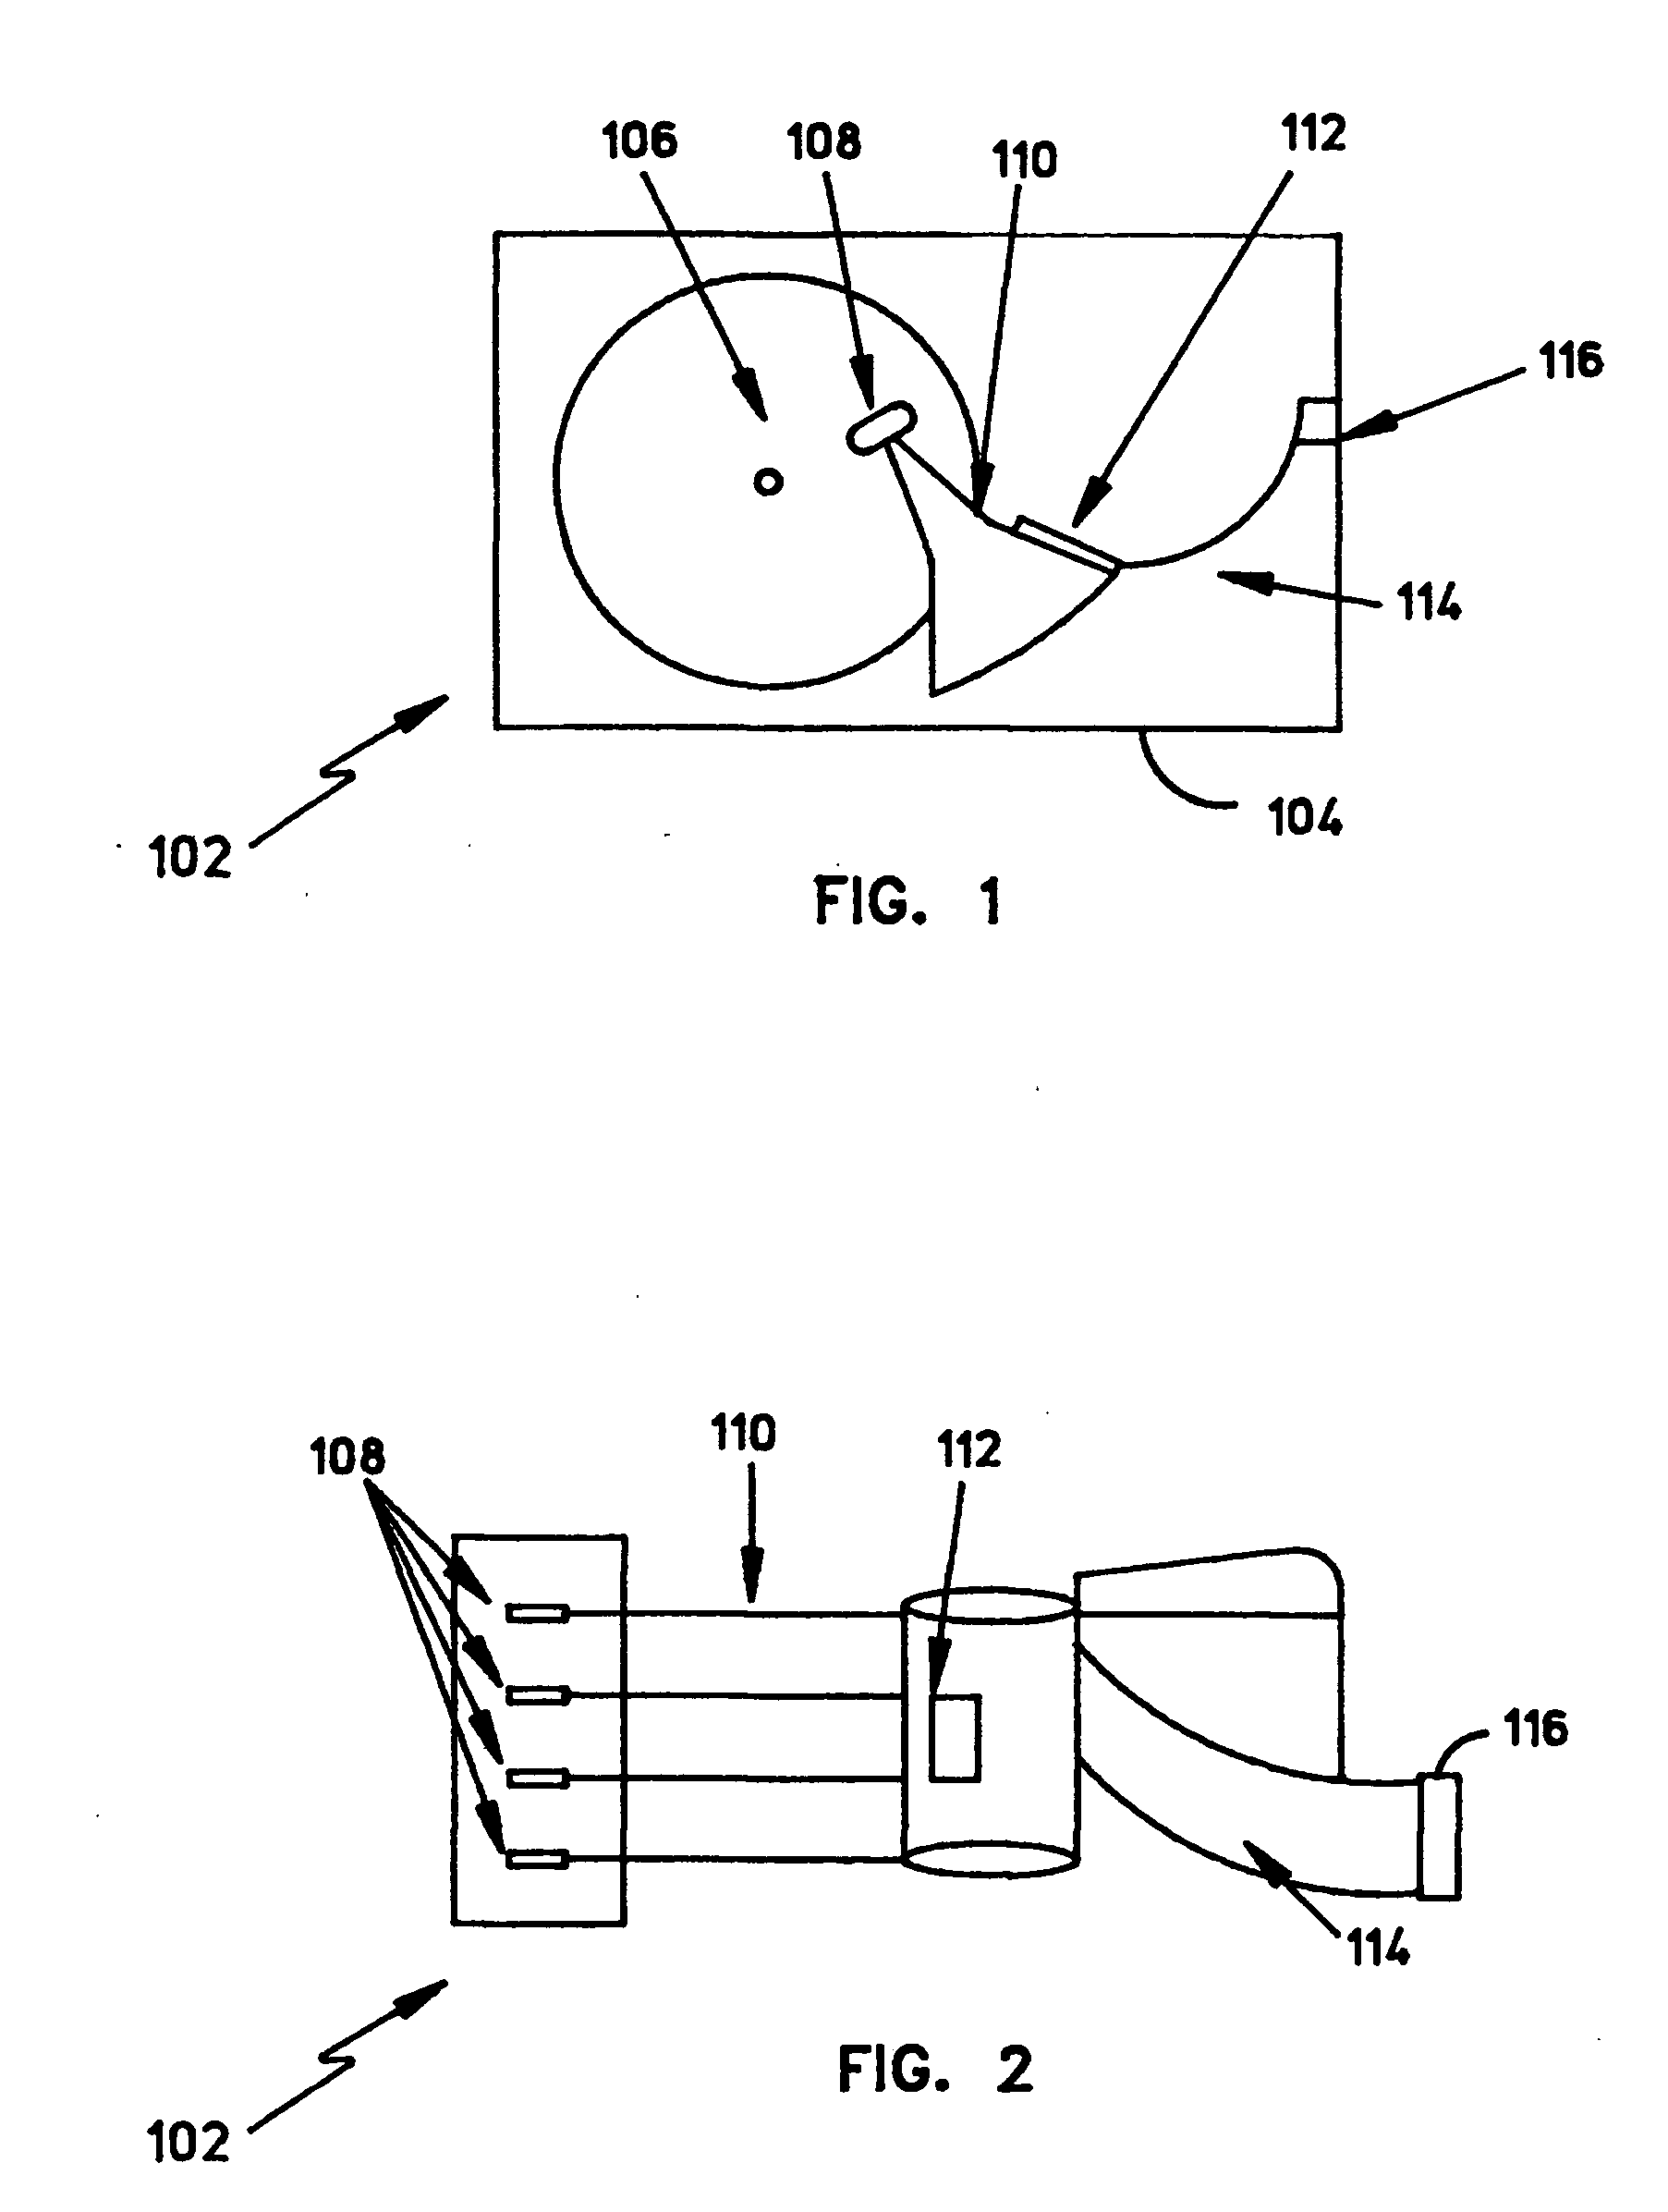 Preamplifier circuit with signal interference cancellation suitable for use in magnetic storage devices